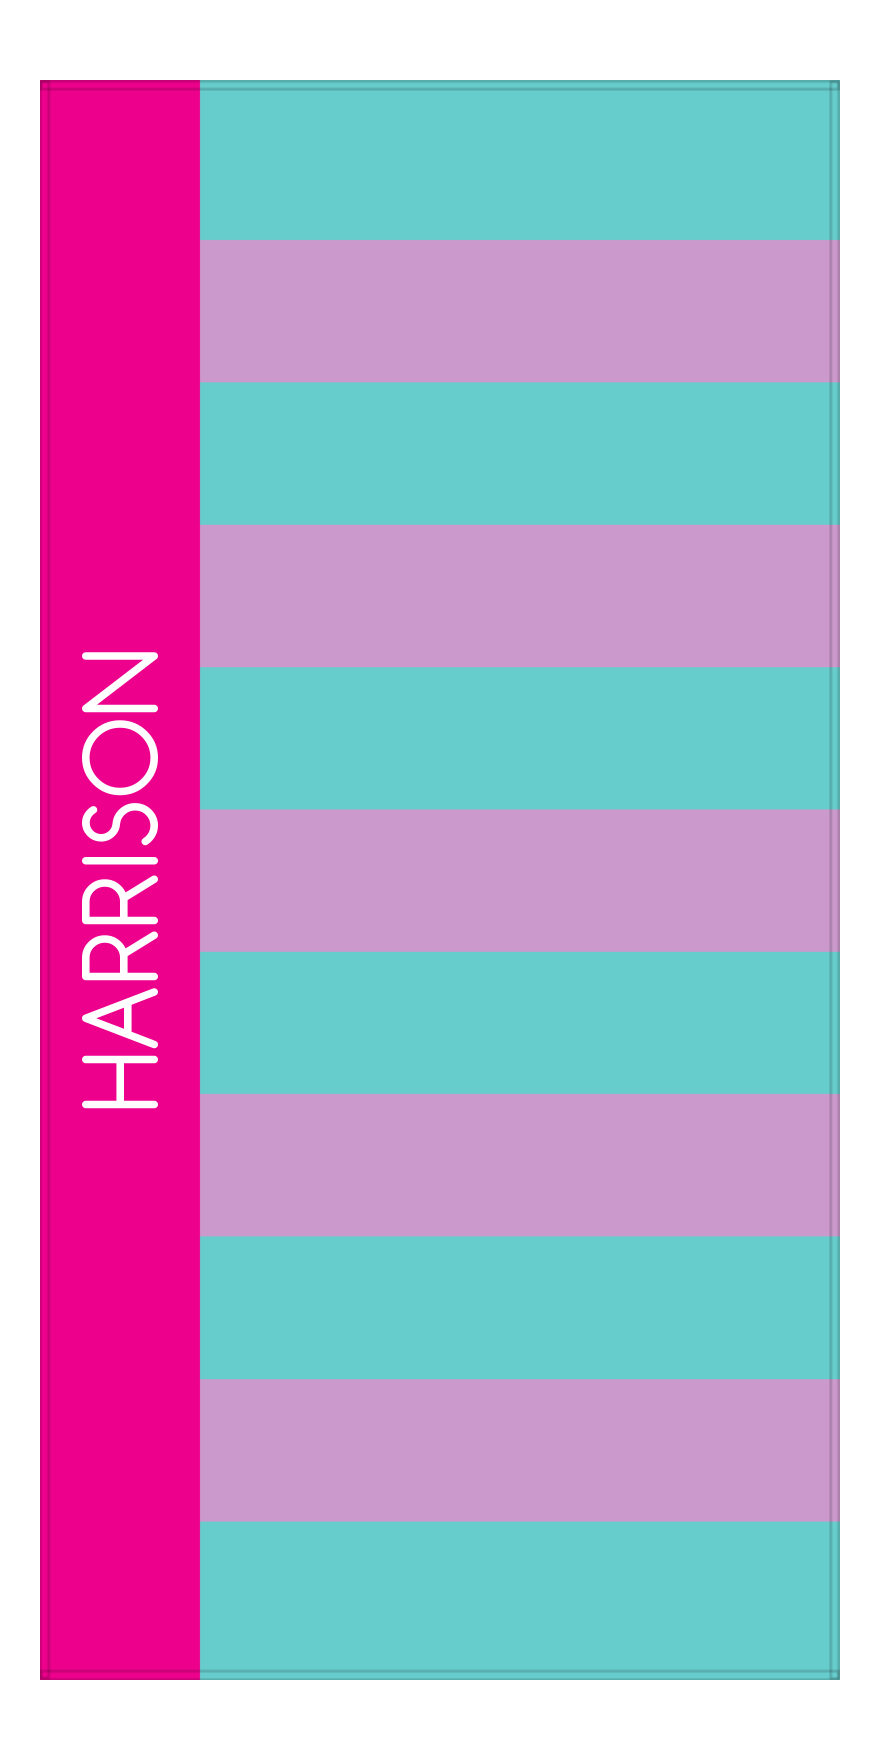 Personalized Rugby Stripes Beach Towel V - Teal and Pink - Front View